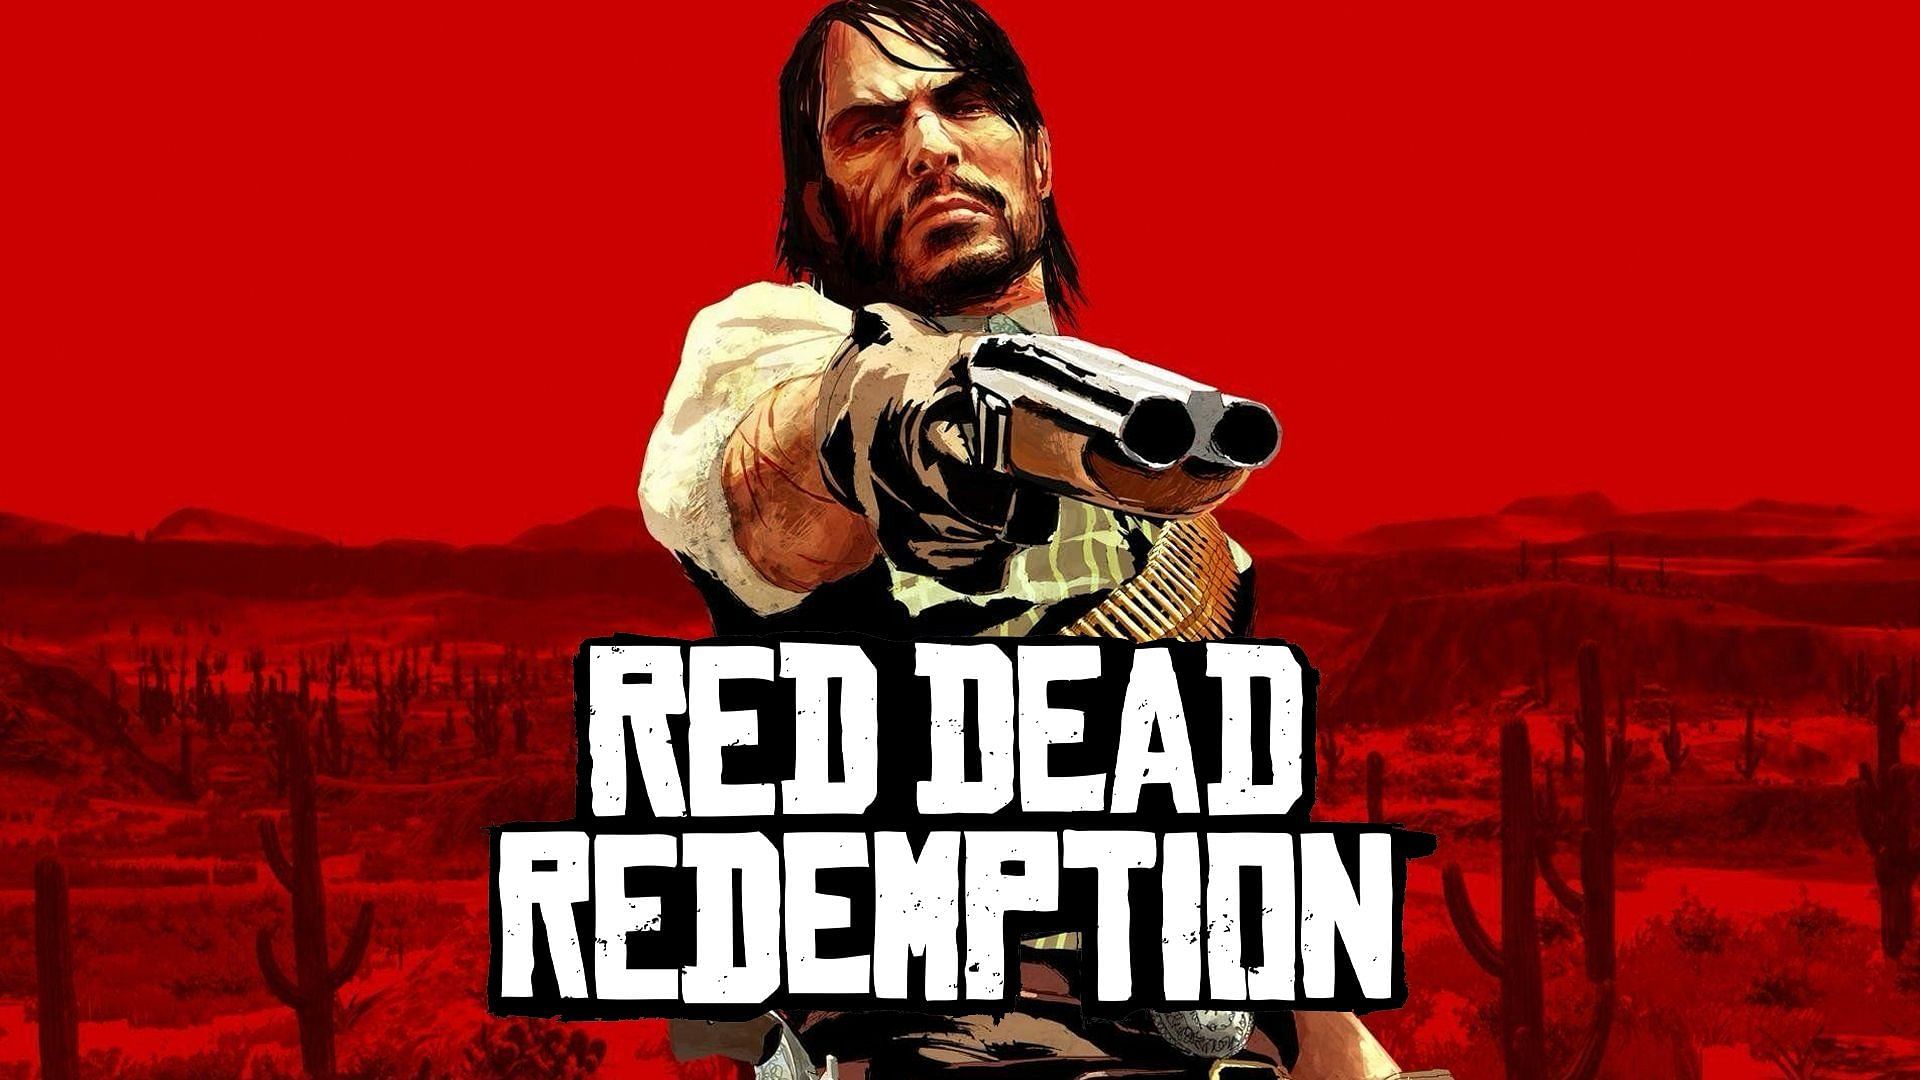 Red Dead Redemption on PC